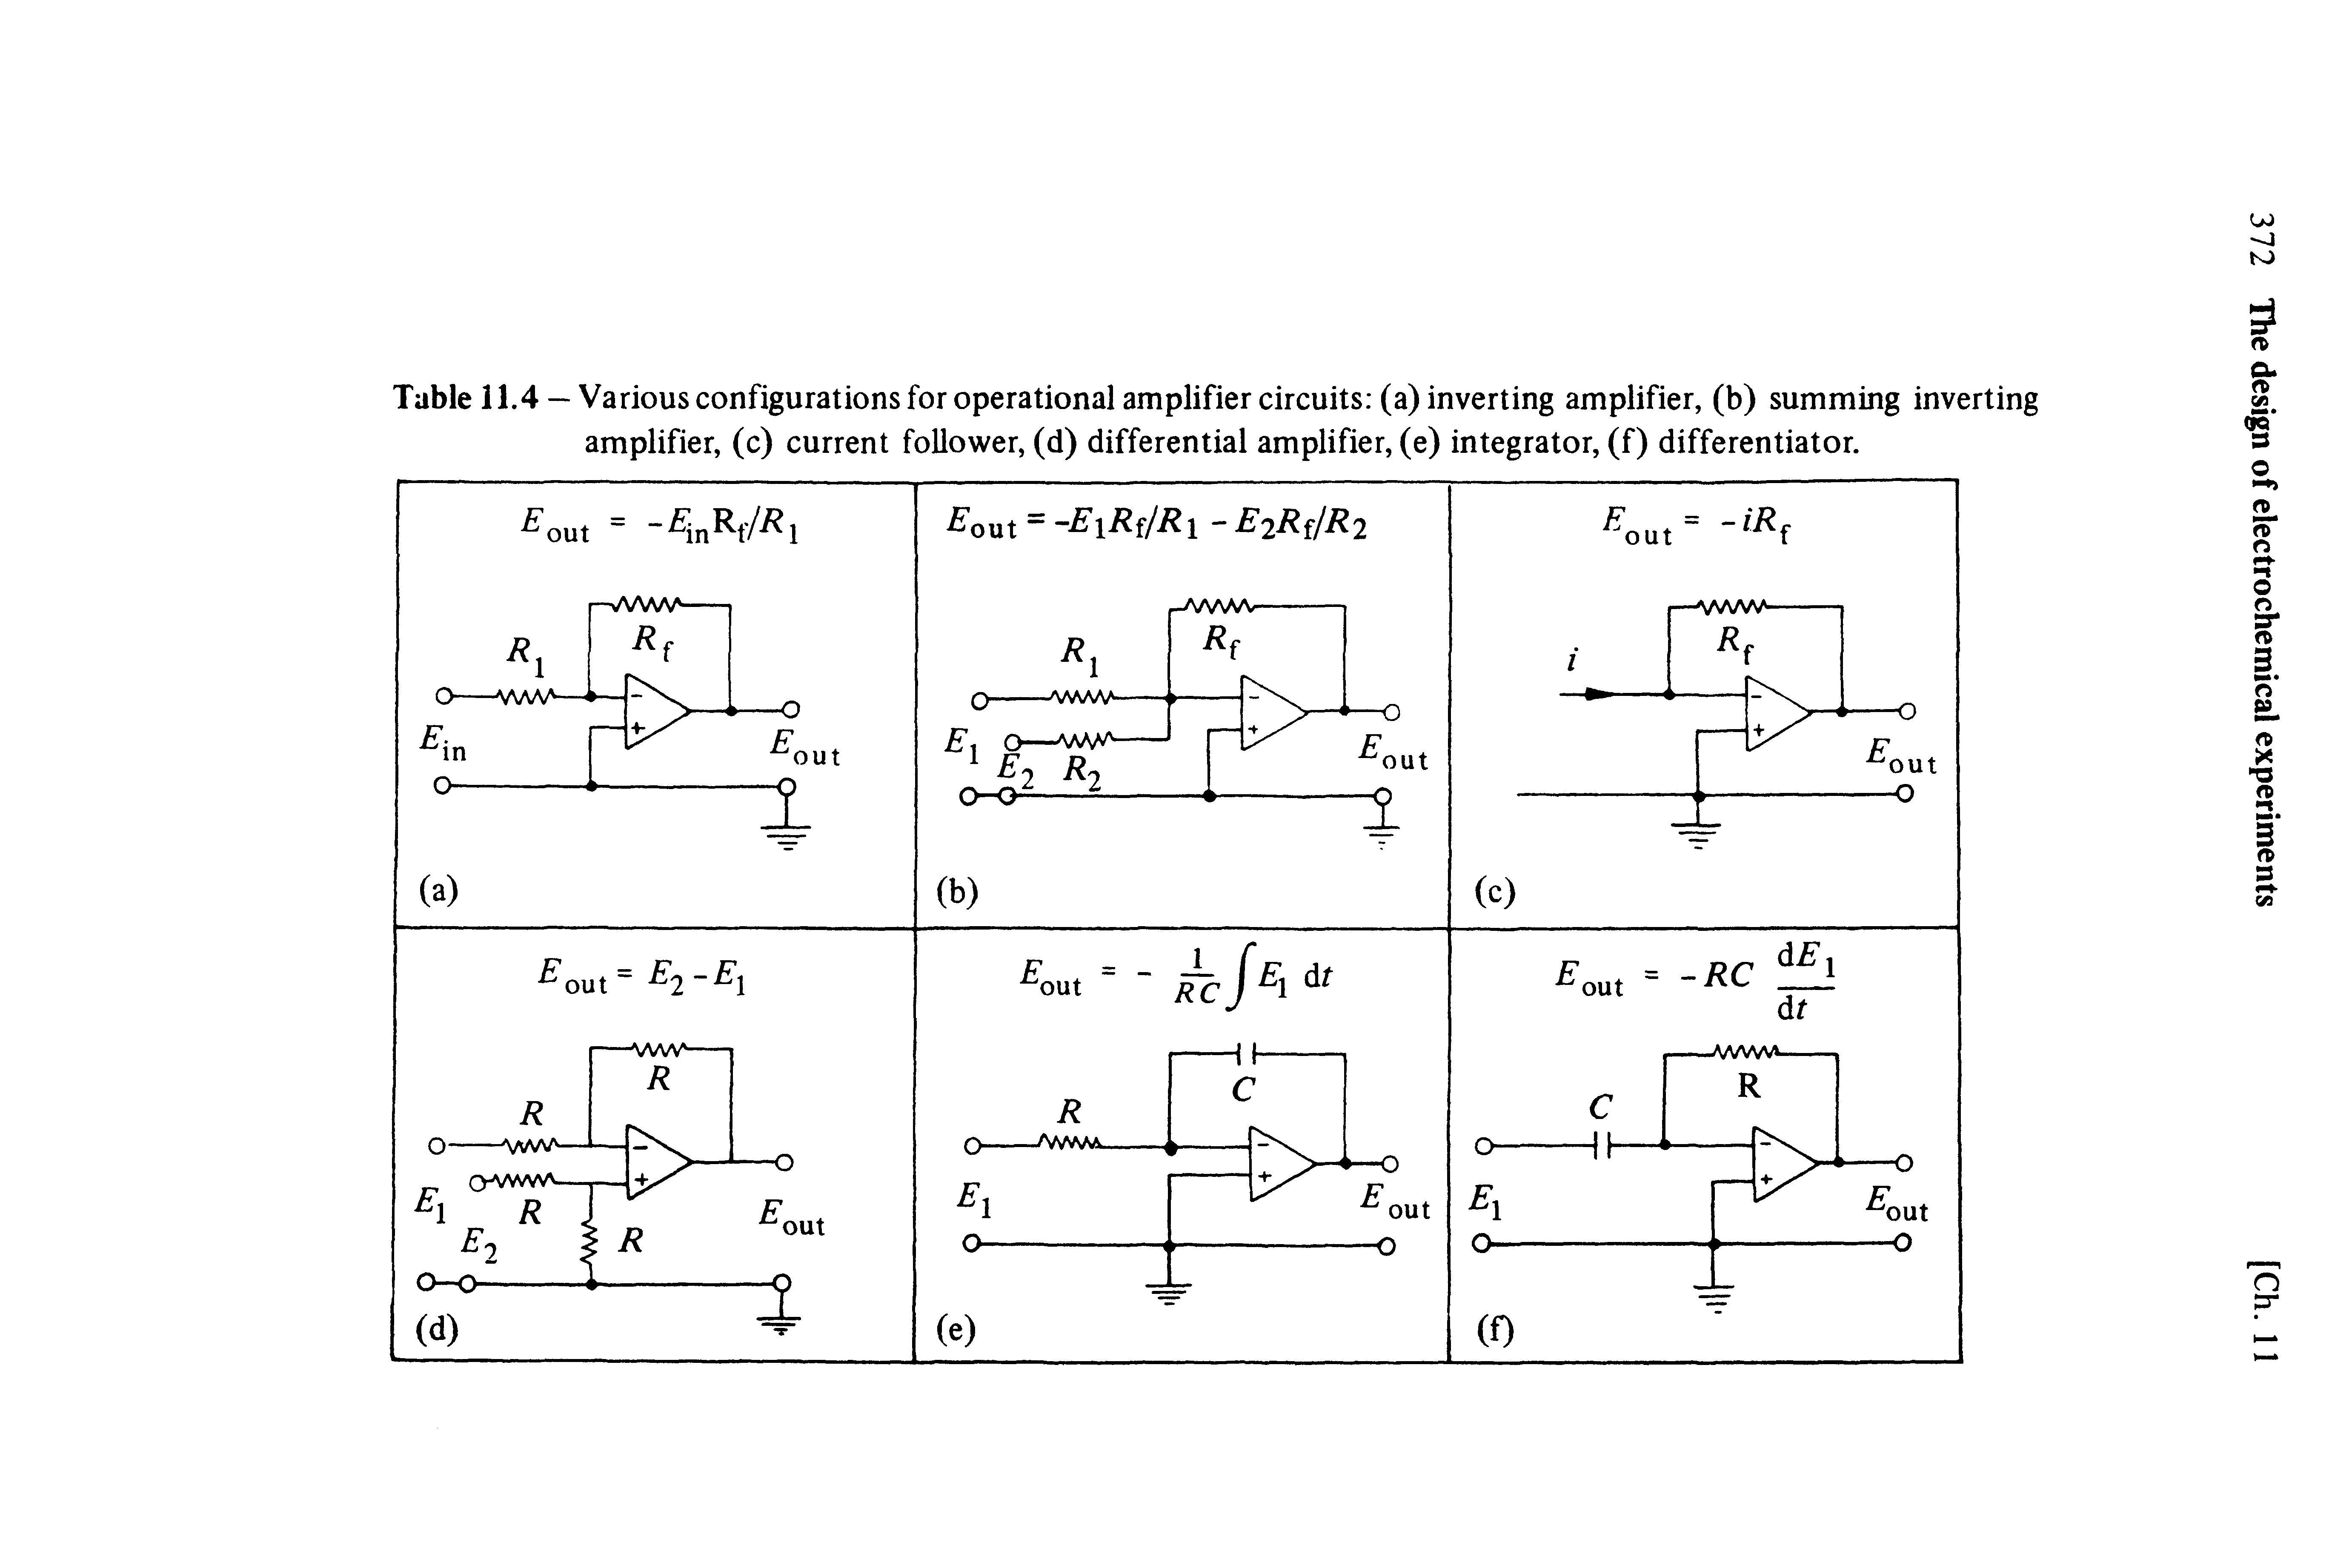 Table 11.4 —Various configurations for operational amplifier circuits (a) inverting amplifier, (b) summing inverting amplifier, (c) current follower, (d) differential amplifier, (e) integrator, (f) differentiator.